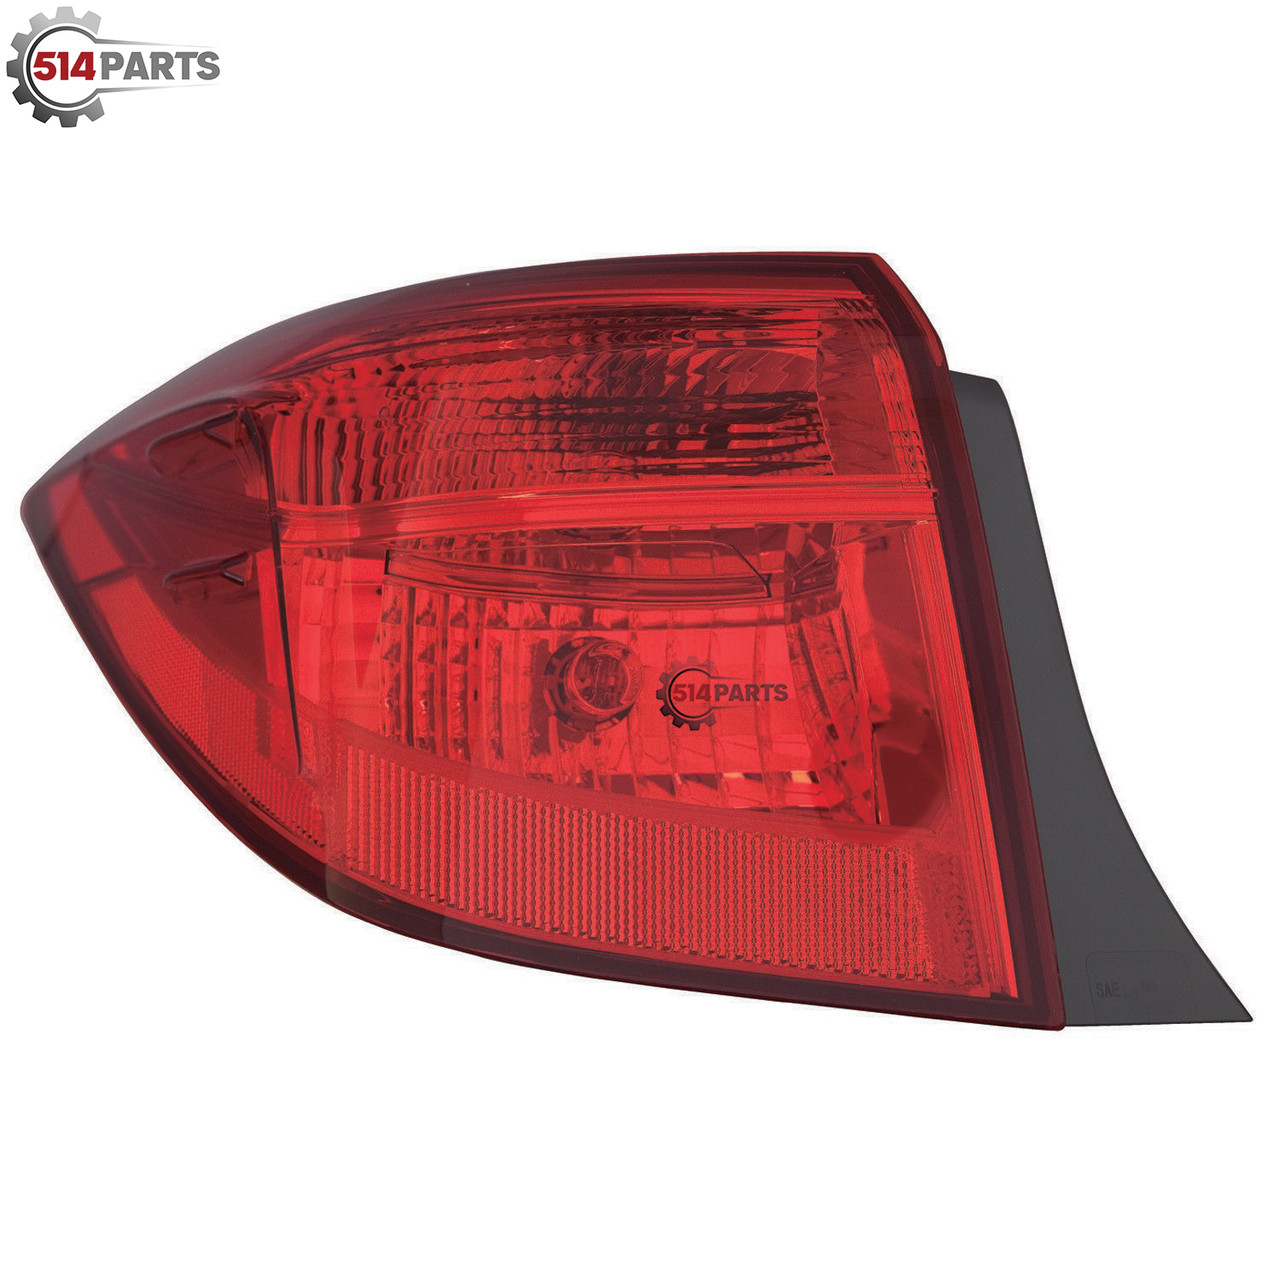 2017 - 2019 TOYOTA COROLLA SEDAN LED TAIL LIGHTS High Quality - PHARES ARRIERE a DEL Haute Qualite